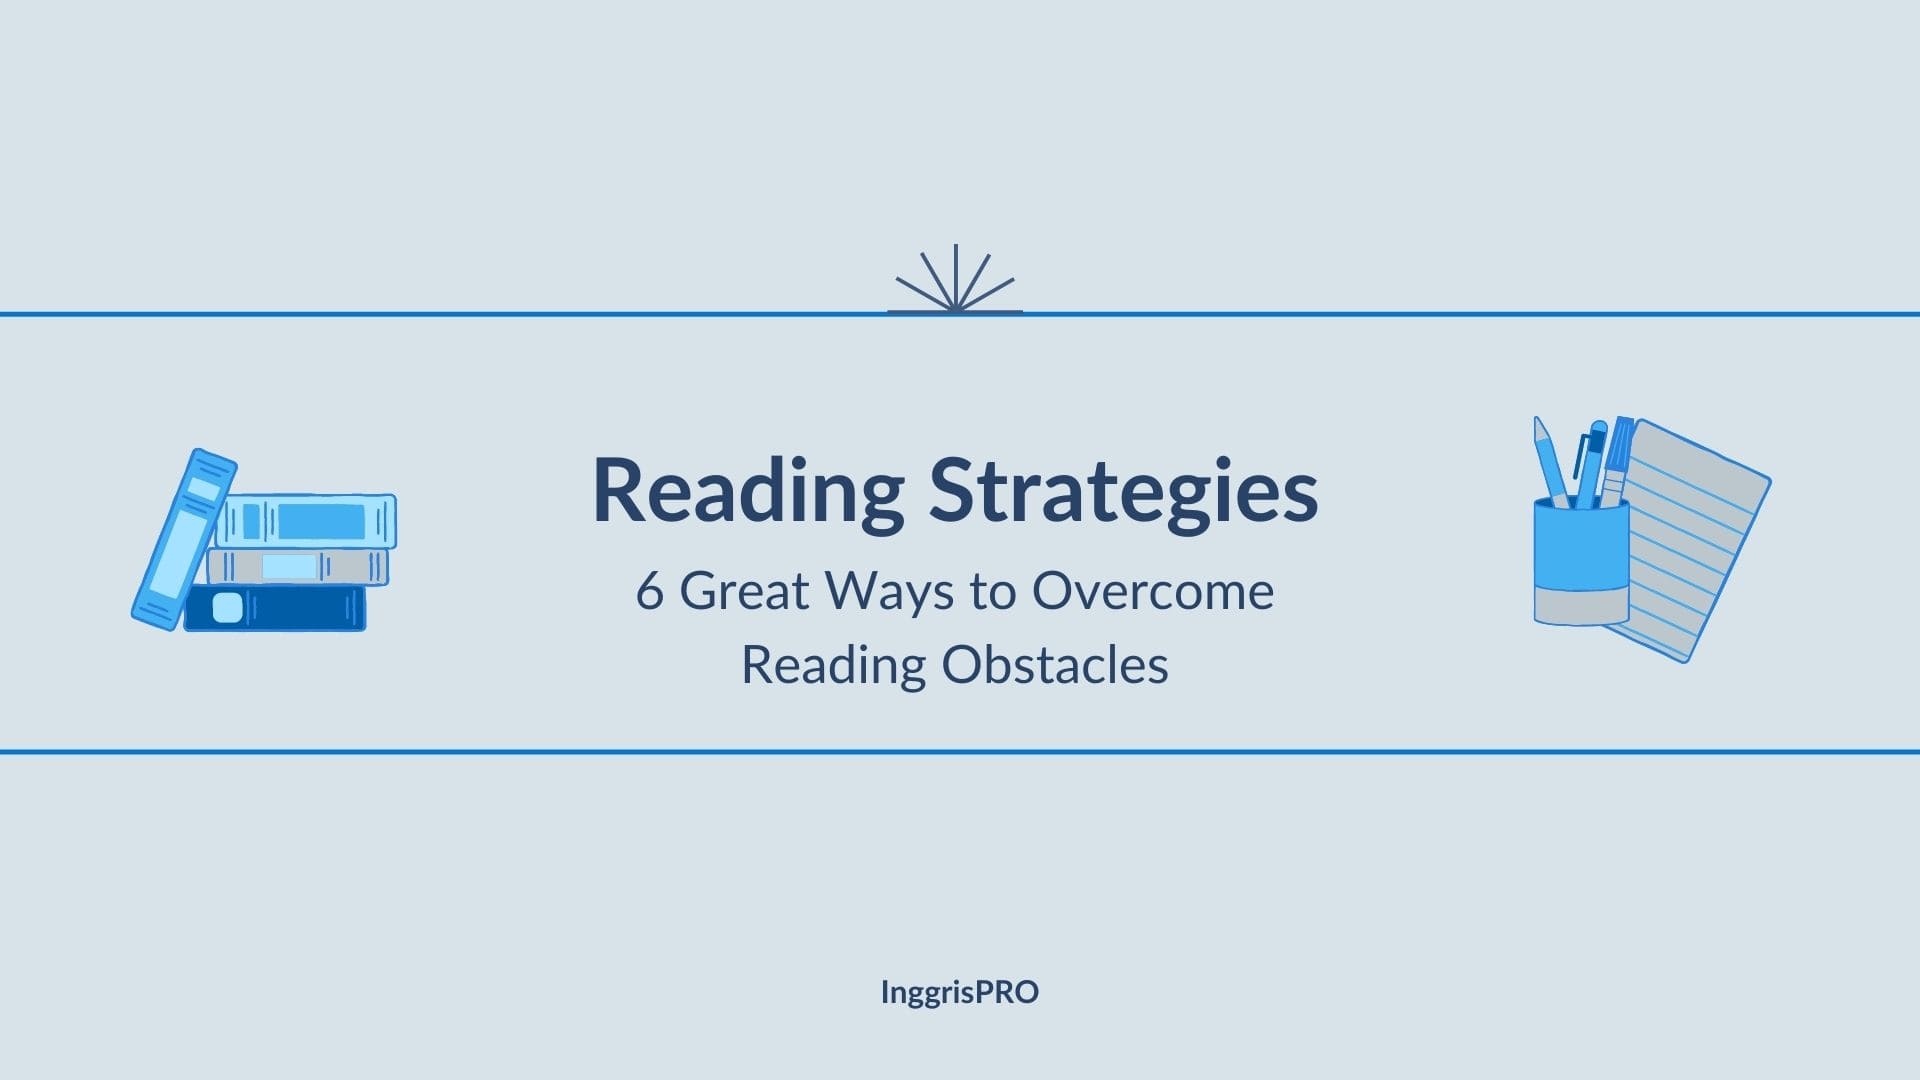 Reading Strategies - 6 Great Ways to Overcome Reading Obstacles